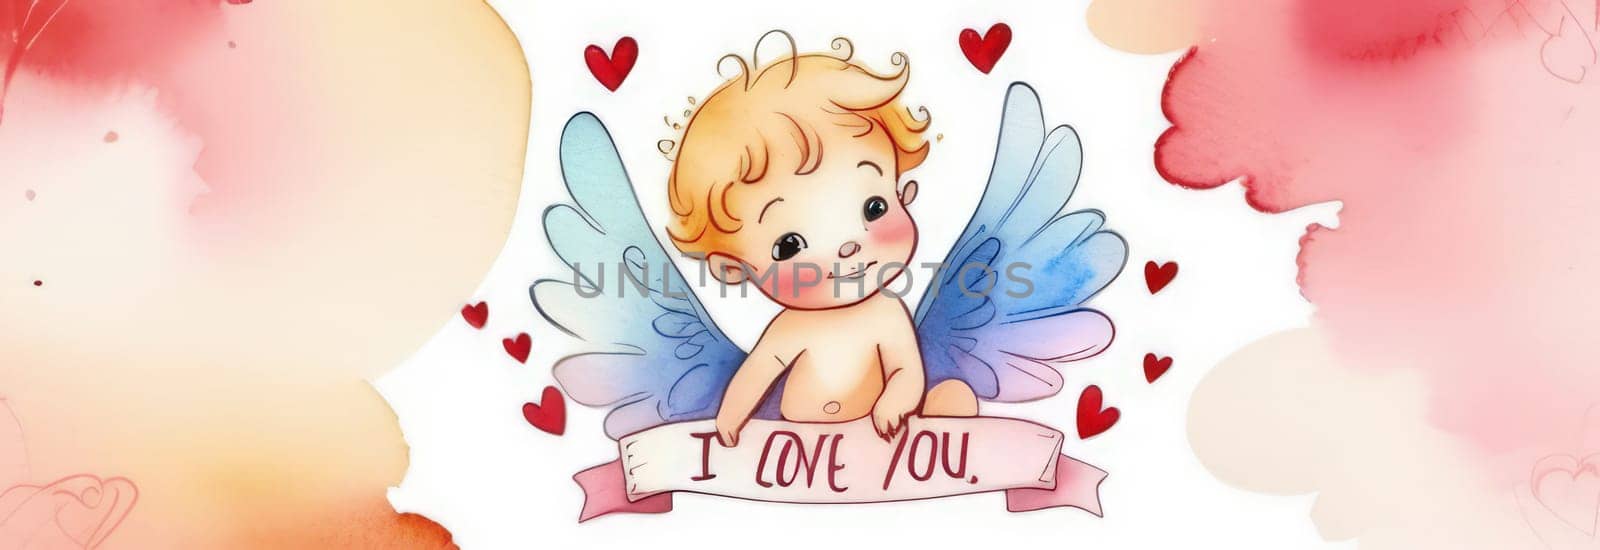 Illustration watercolour of greeting card white, cute, funny baby cupid angel with gold curly hair on pastels background. Promotion, shopping template for love and valentines, mothers day concept